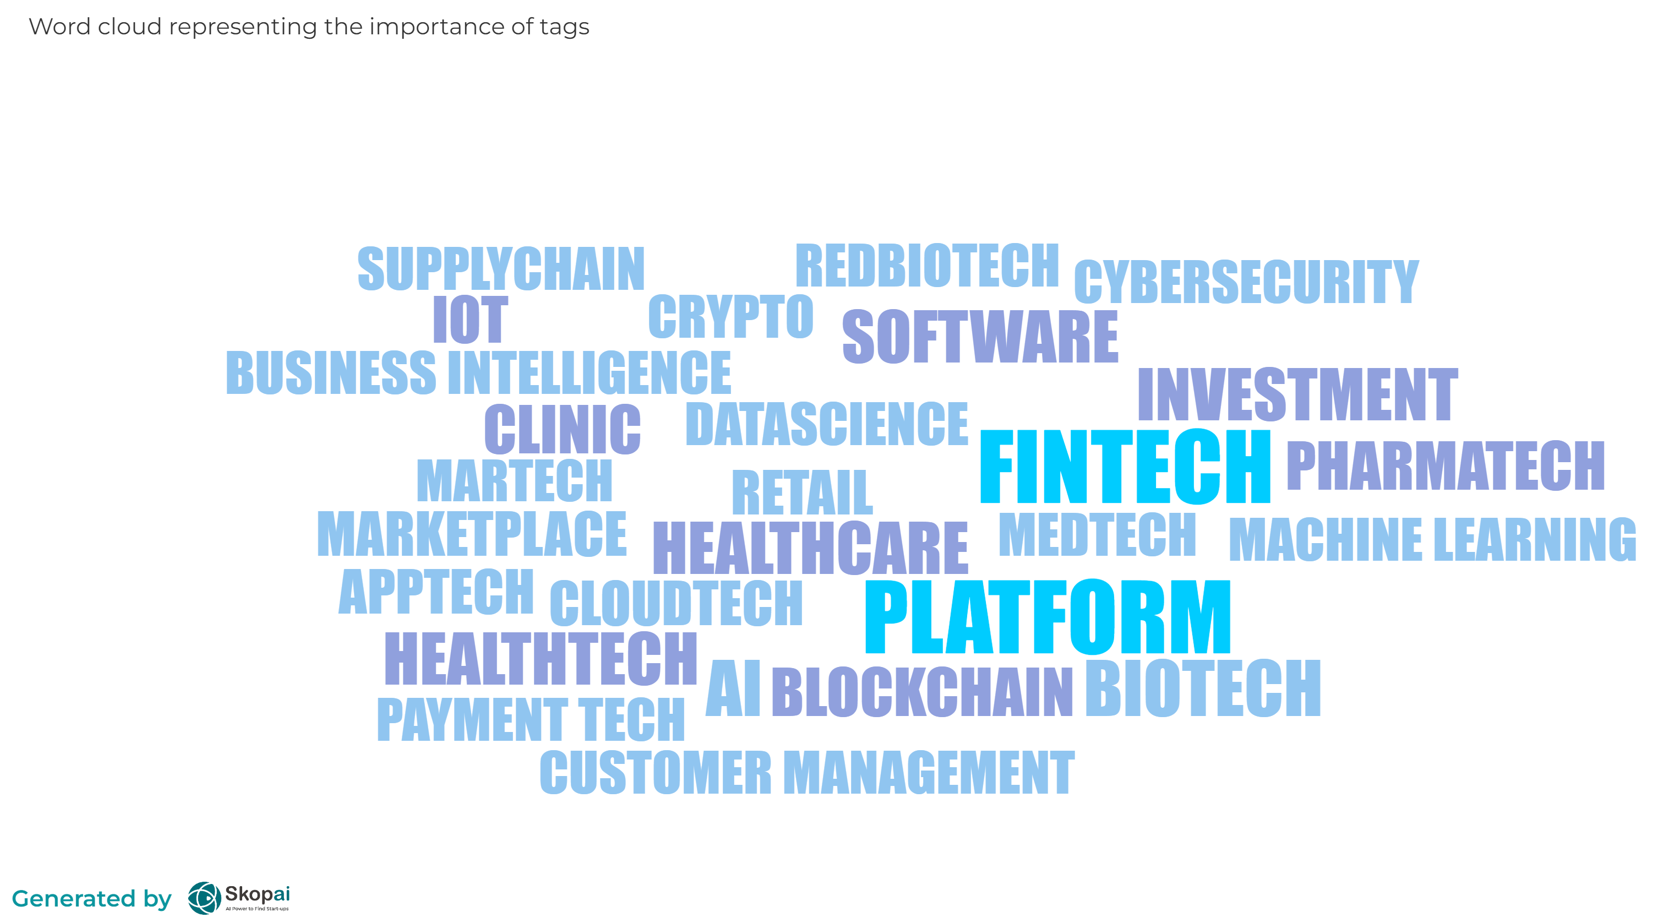 Skopai start-up fundraising news: Word cloud representing the importance of tags.